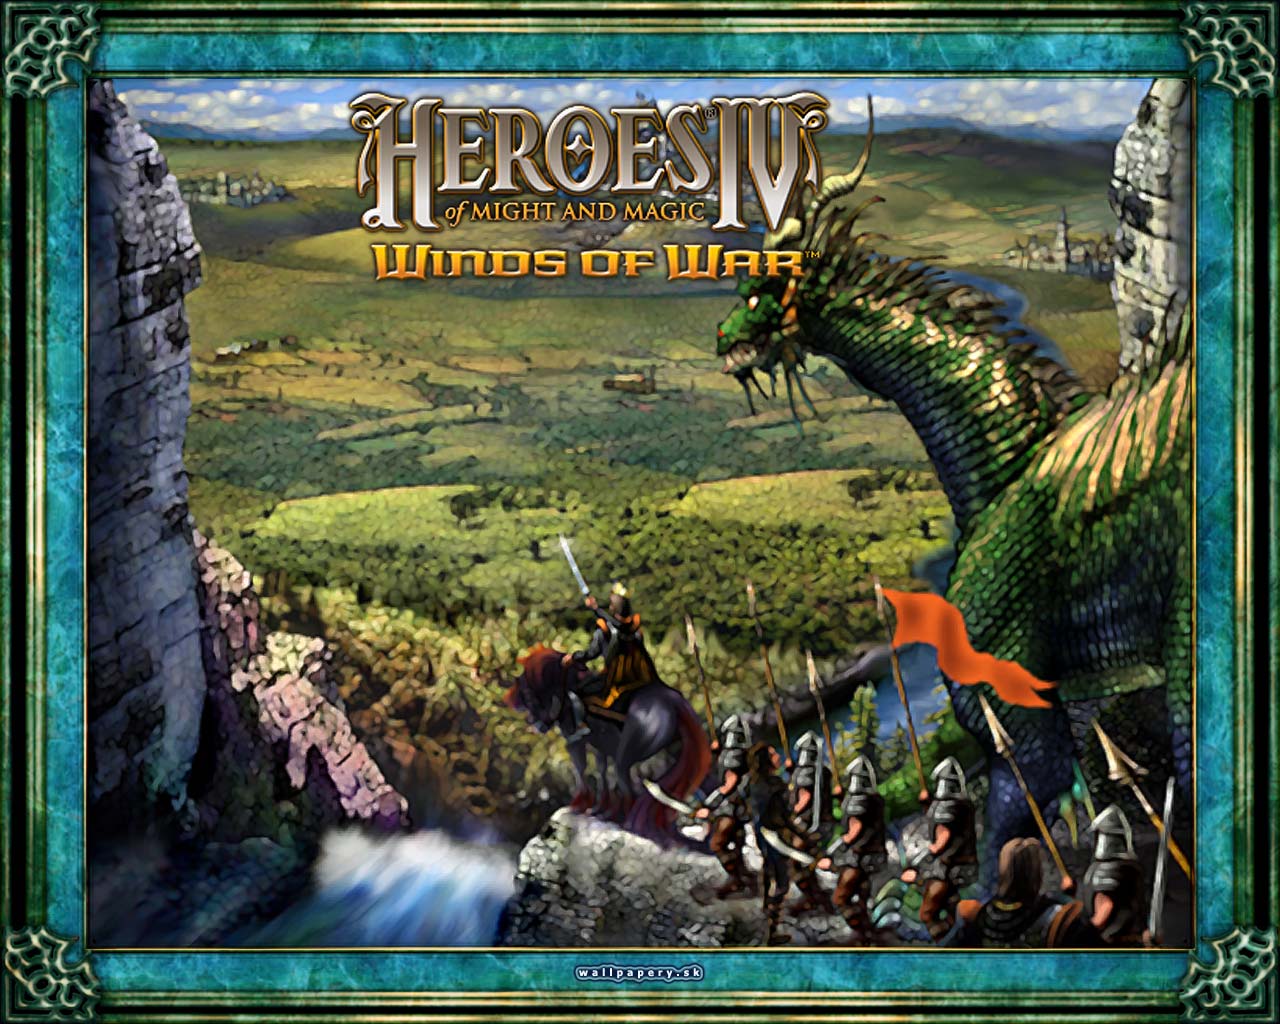 Heroes of Might & Magic 4: Winds of War - wallpaper 2